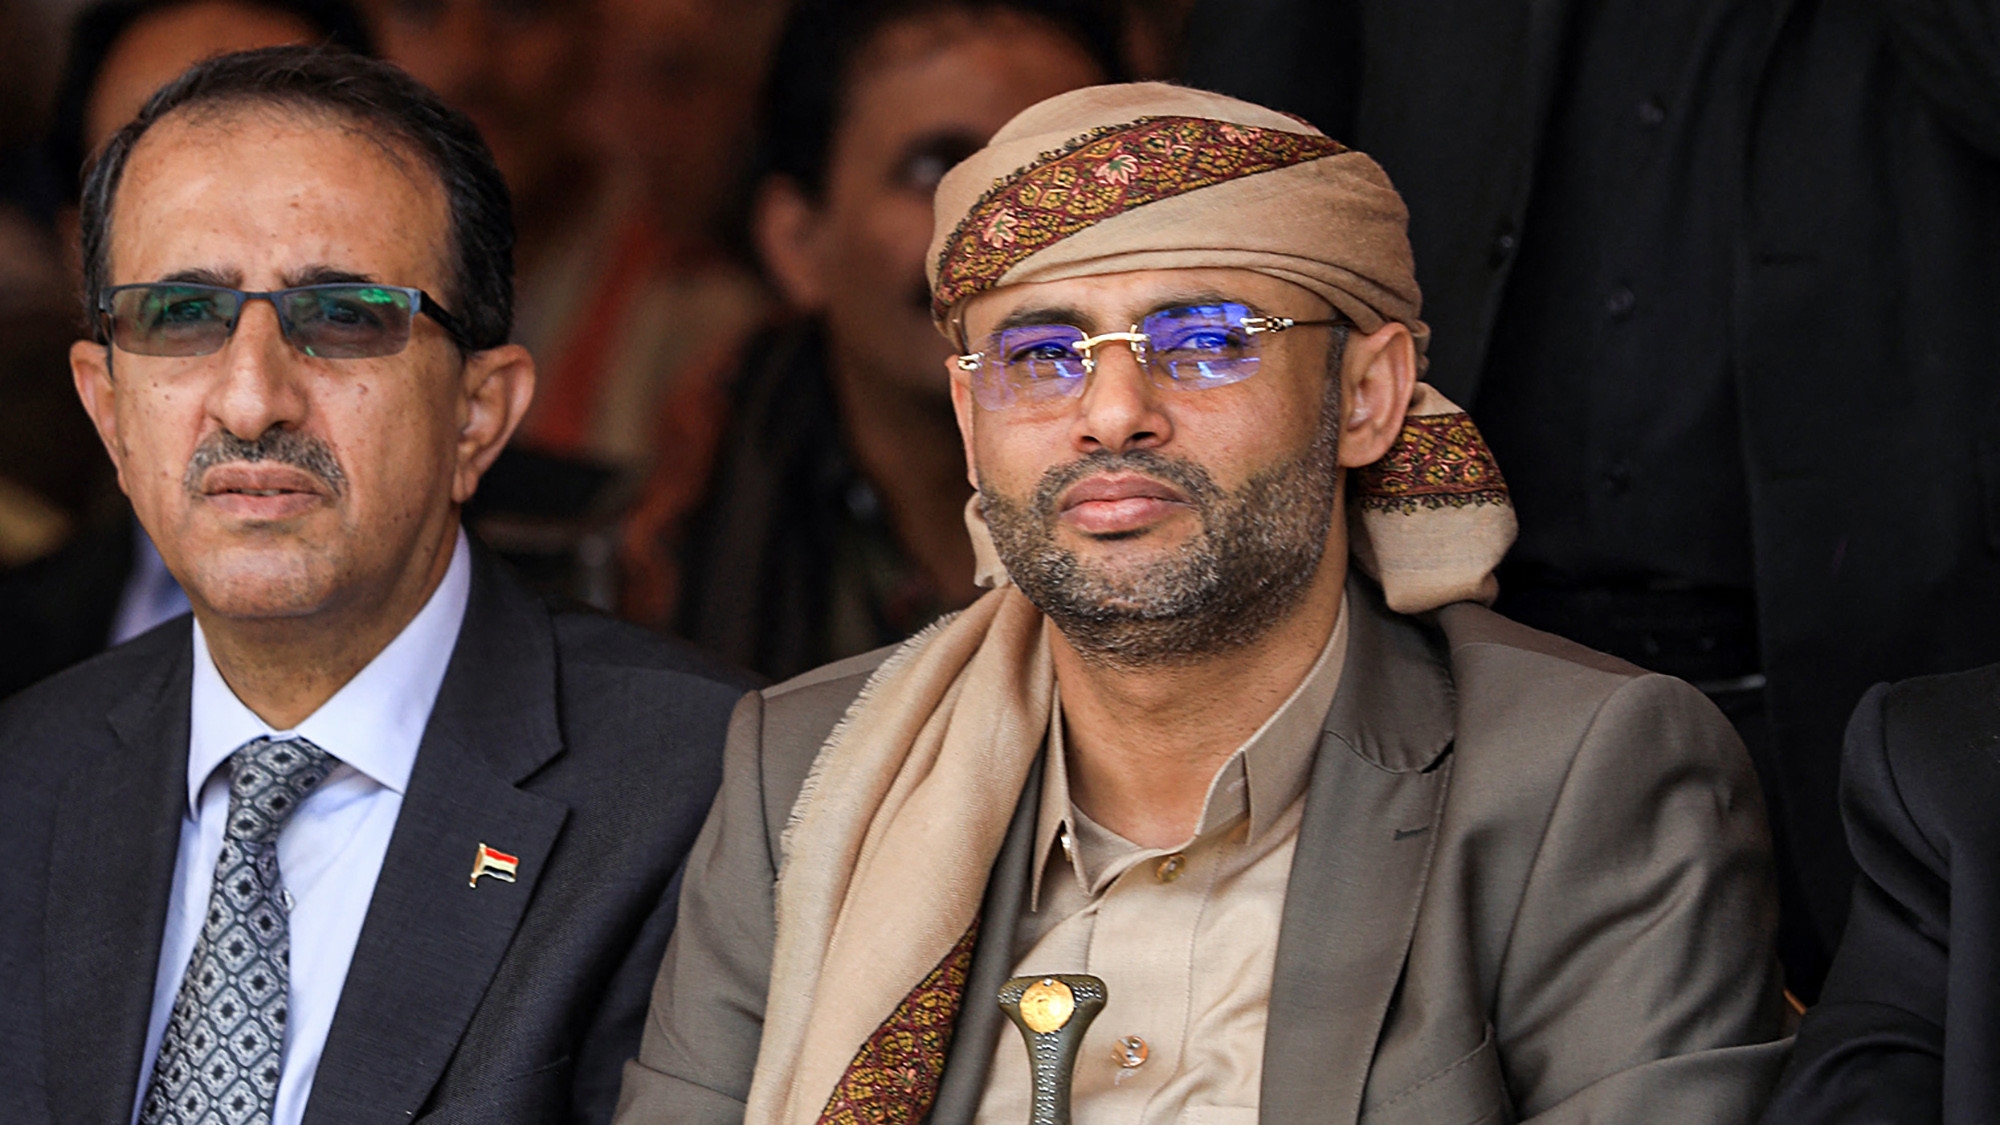 Mahdi al-Mashat (R), head of the Huthi Supreme Political Council pictured at a ceremony in Yemen's capital Sanaa on 9 October 2021 (AFP)